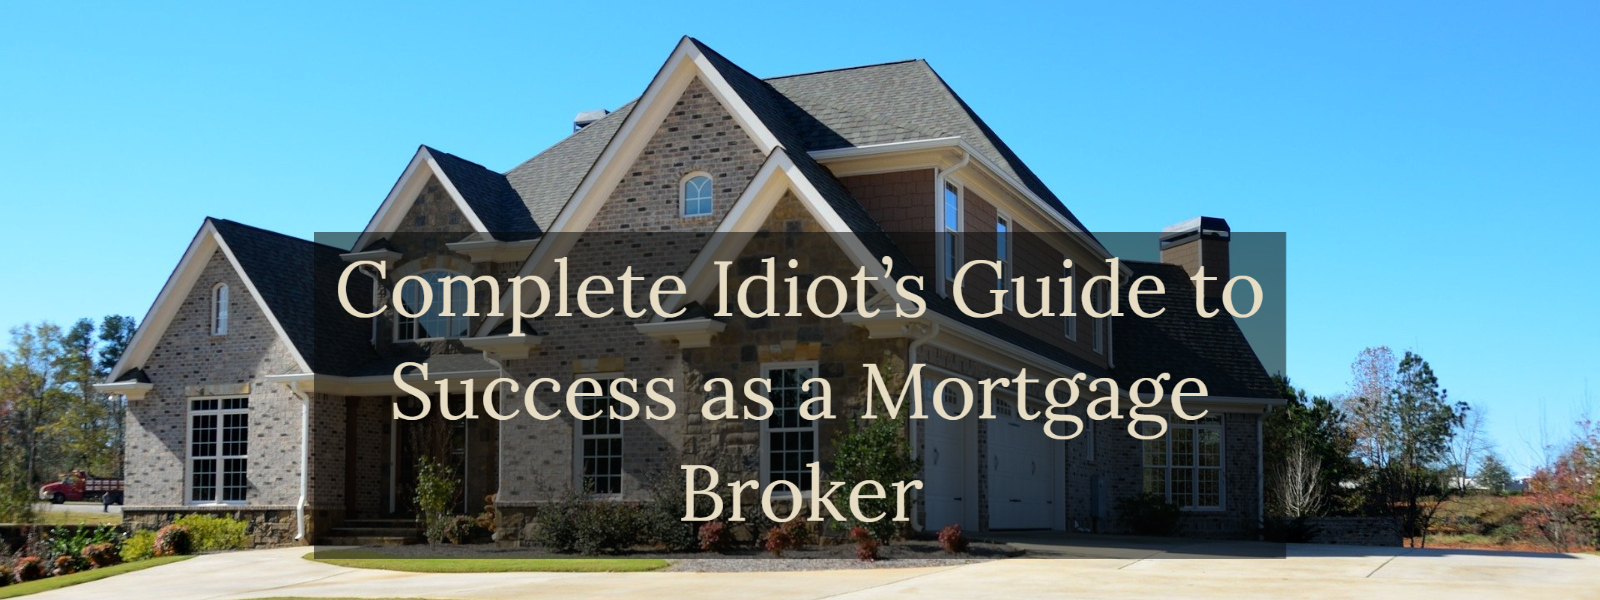 Complete Idiot's Guide to Success as a Mortgage Broker